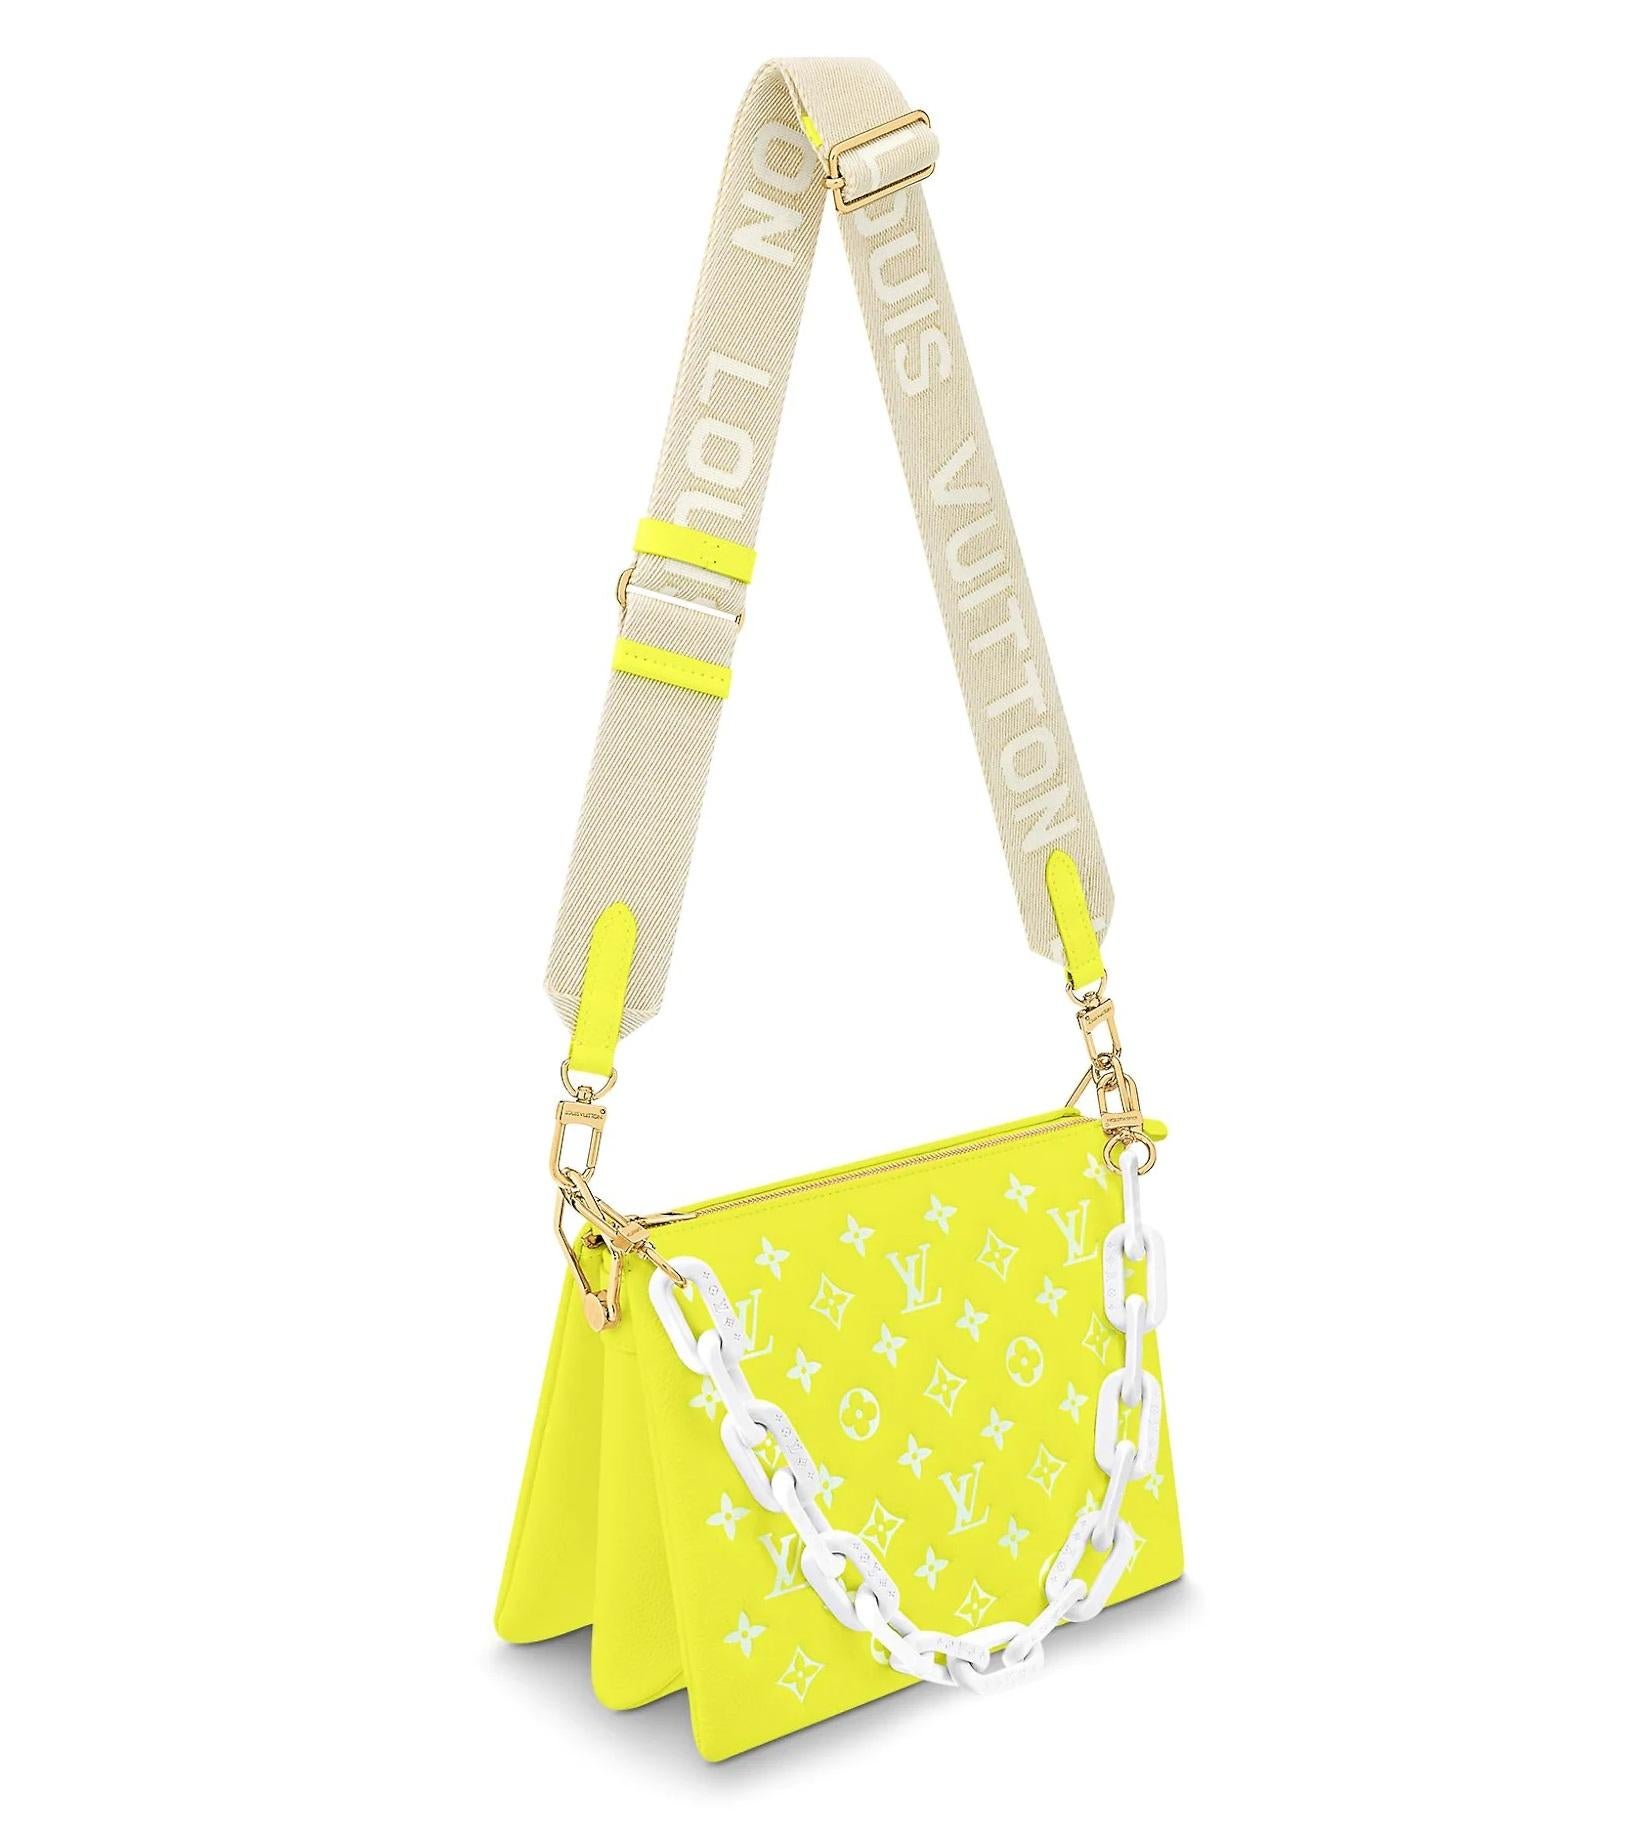 This brightly coloured bag has a chain that enables shoulder carry, while a wide shoulder strap allows shoulder and cross-body wear. Inside: 3 compartments. Strap: removable, adjustable. Strap drop: 30 cm. Strap drop max: 50 cm. Chain: removable.